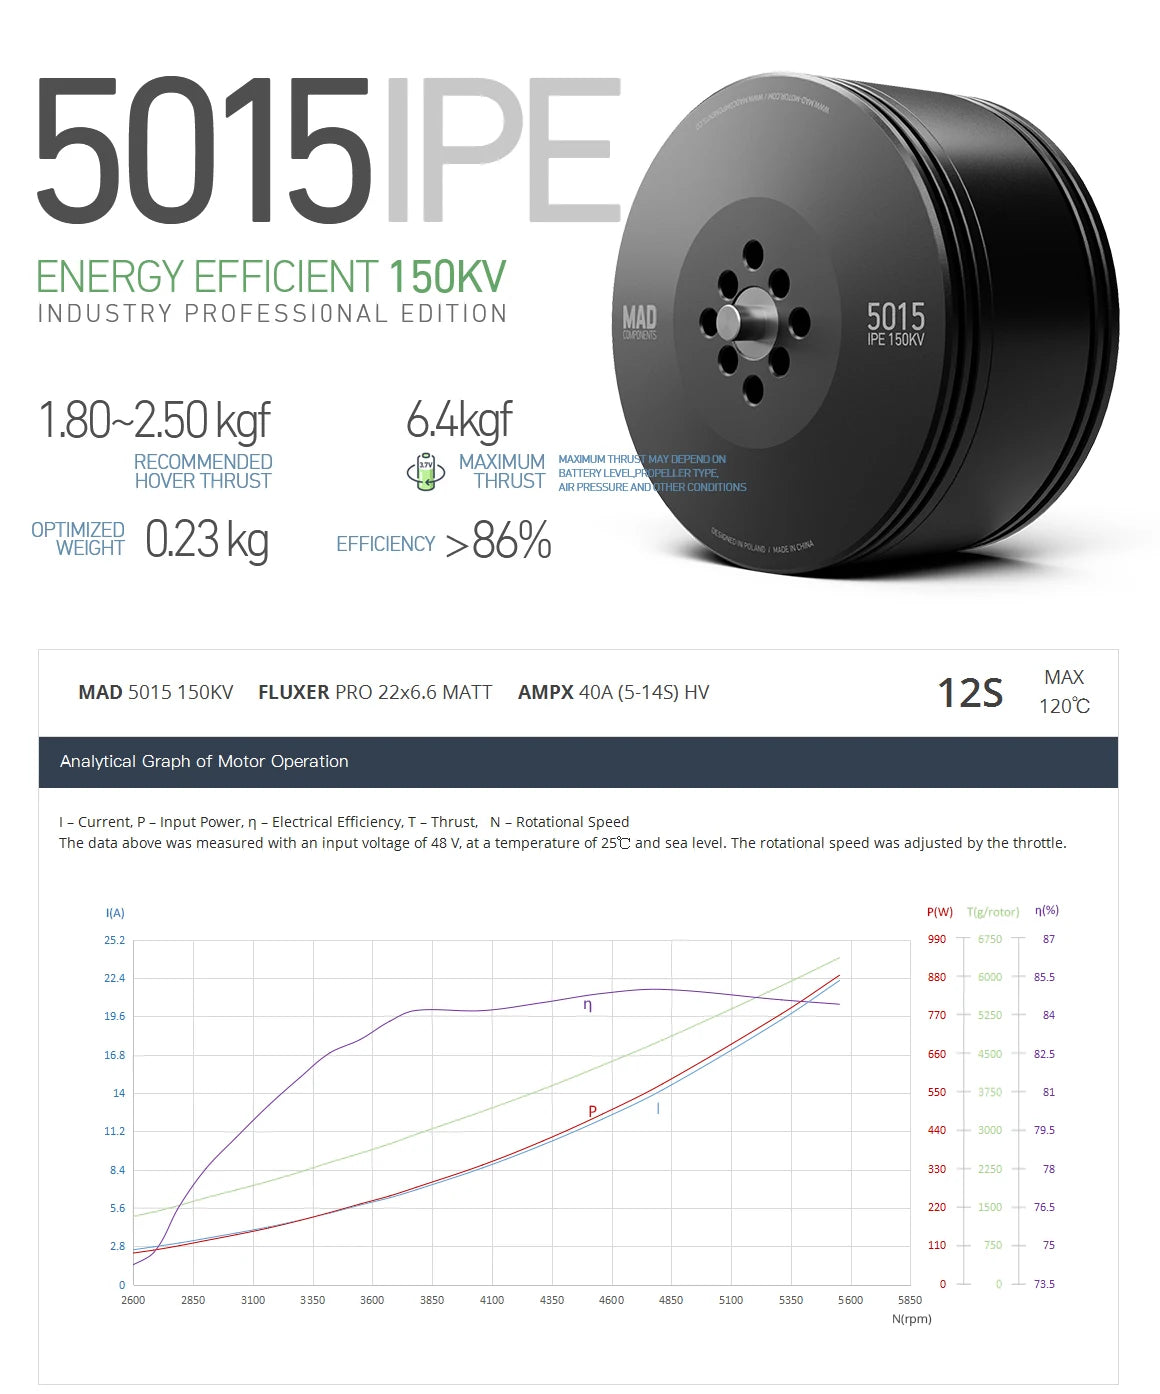 MAD 5015 IPE V3.0 VTOL Drone Motor, Brushless motor for VTOL drones, suitable for quadcopters, hexacopters, and octocopters.